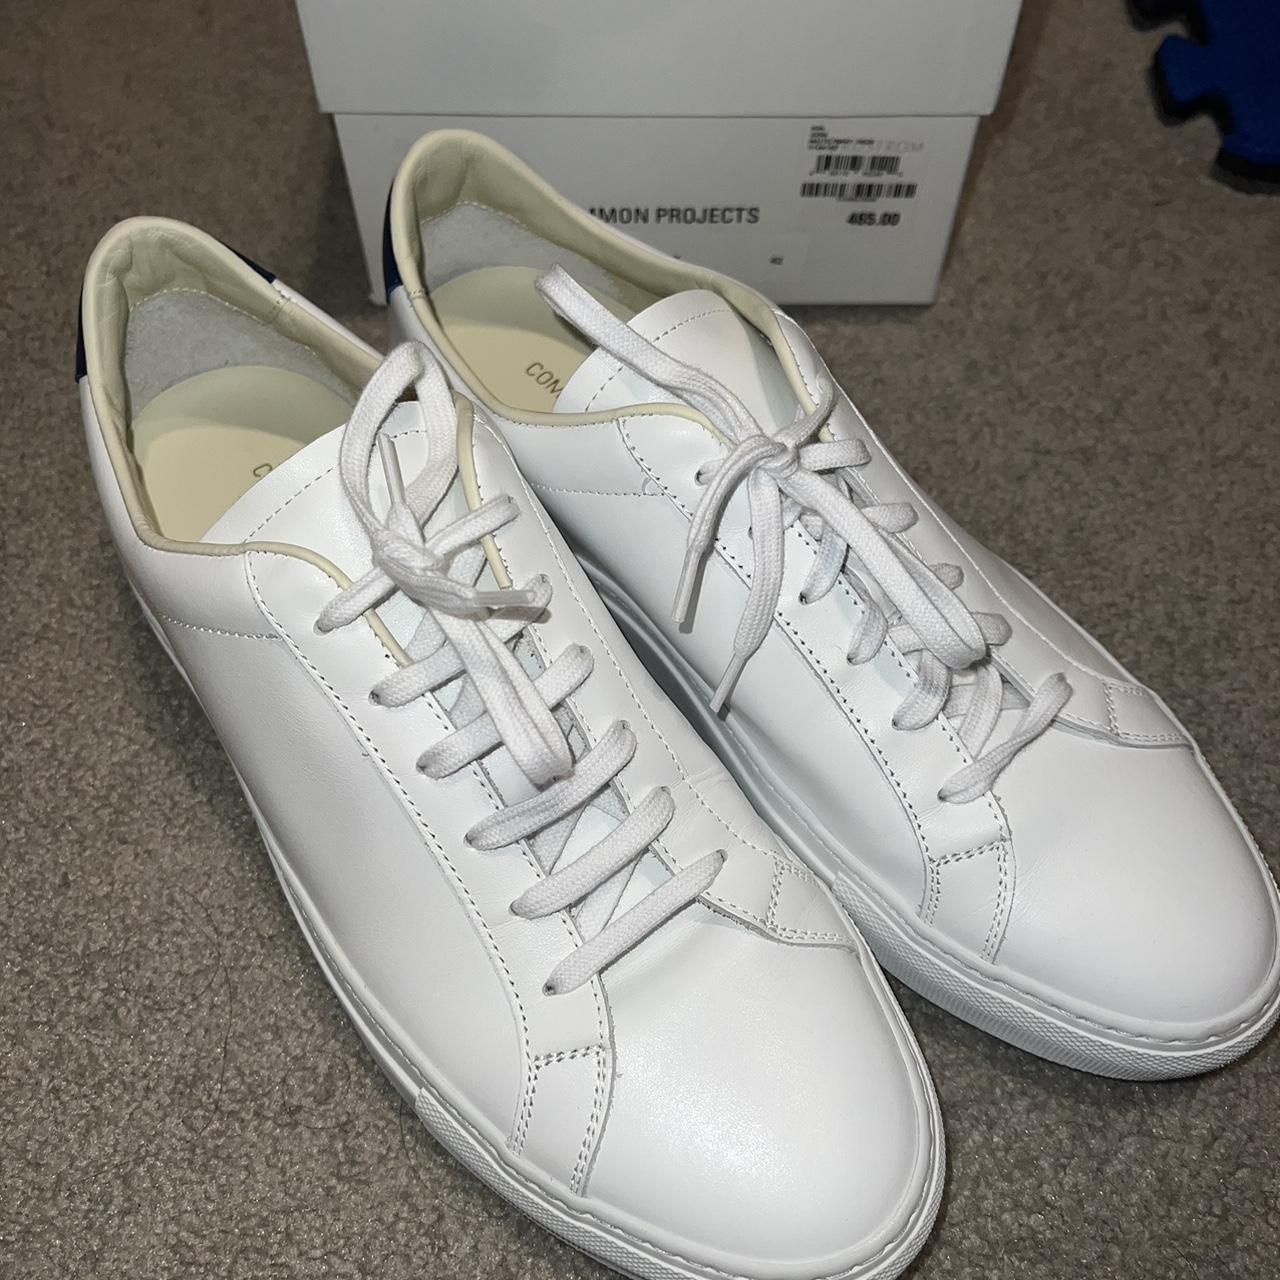 Product Image 2 - Common Projects Retro White/Navy! Retail